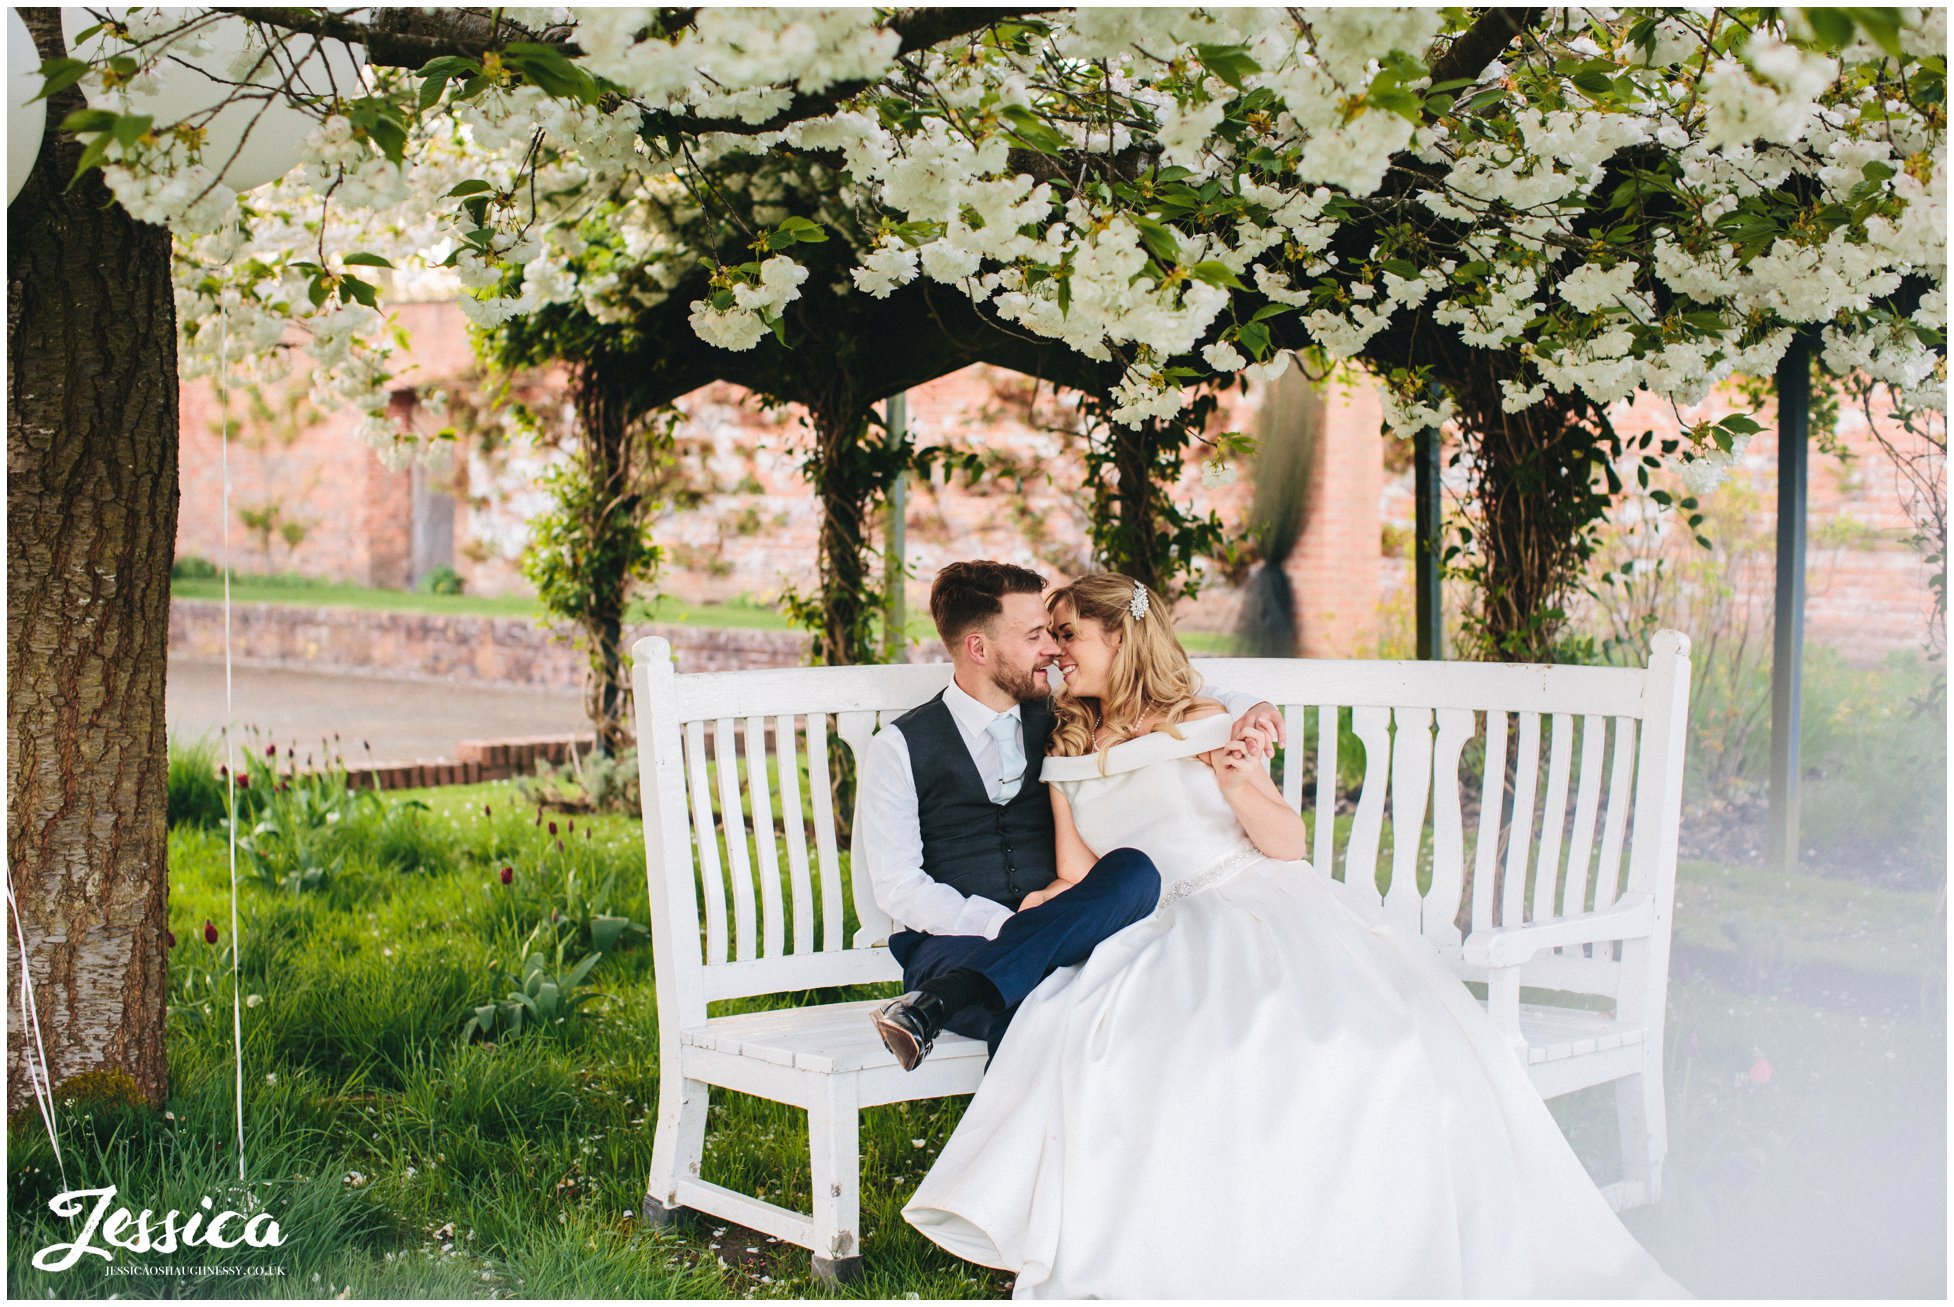 newly wed's kiss on a bench under the blossom trees